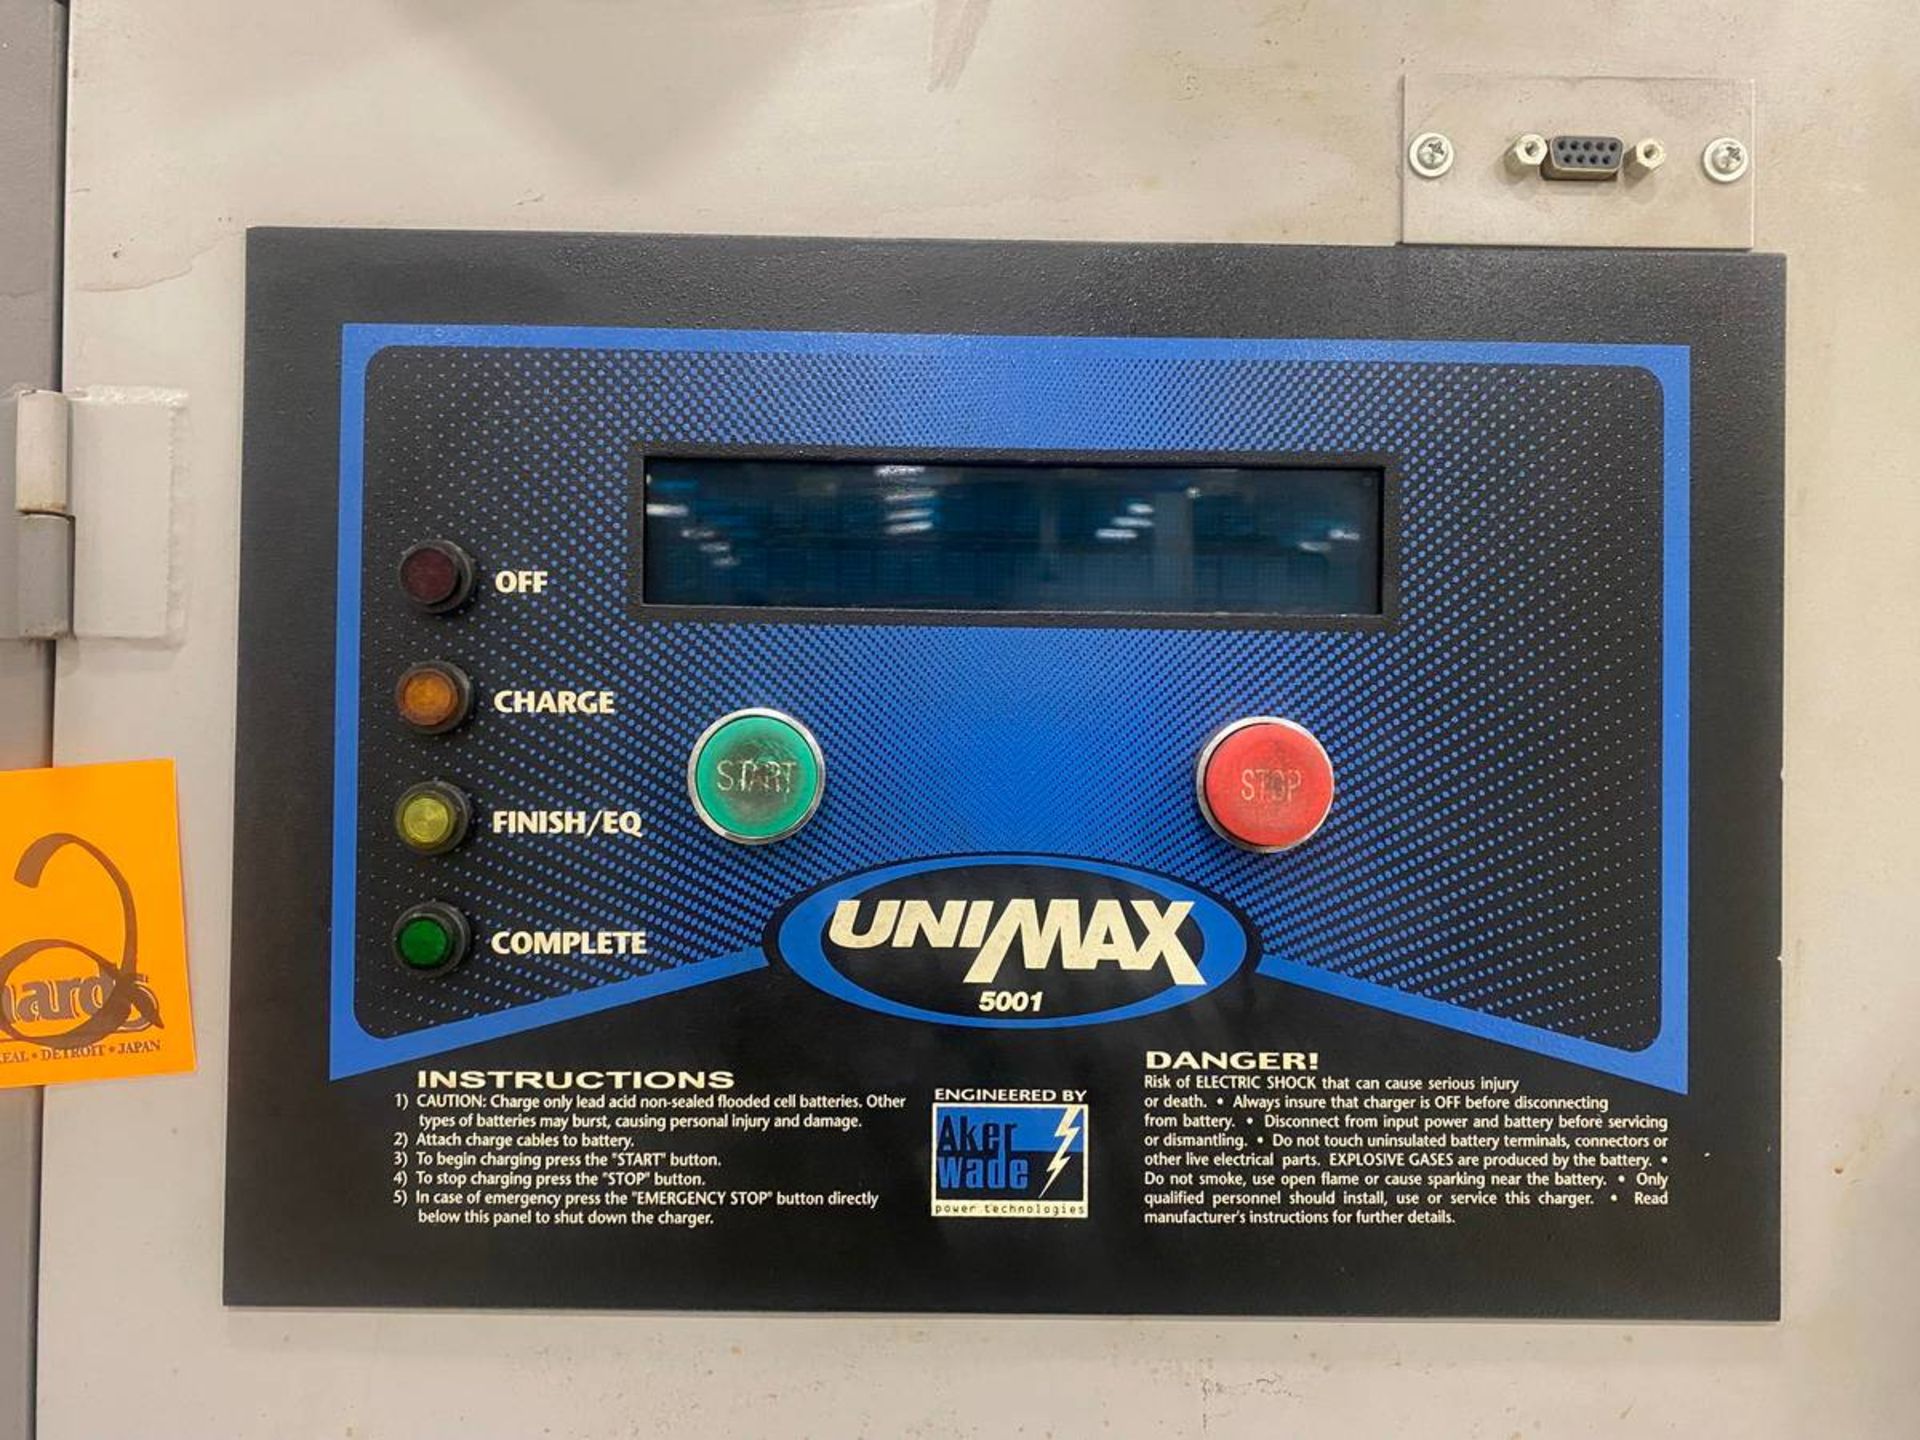 2004 Uni Max 500 6-40 Cells Battery Charger - Image 3 of 4